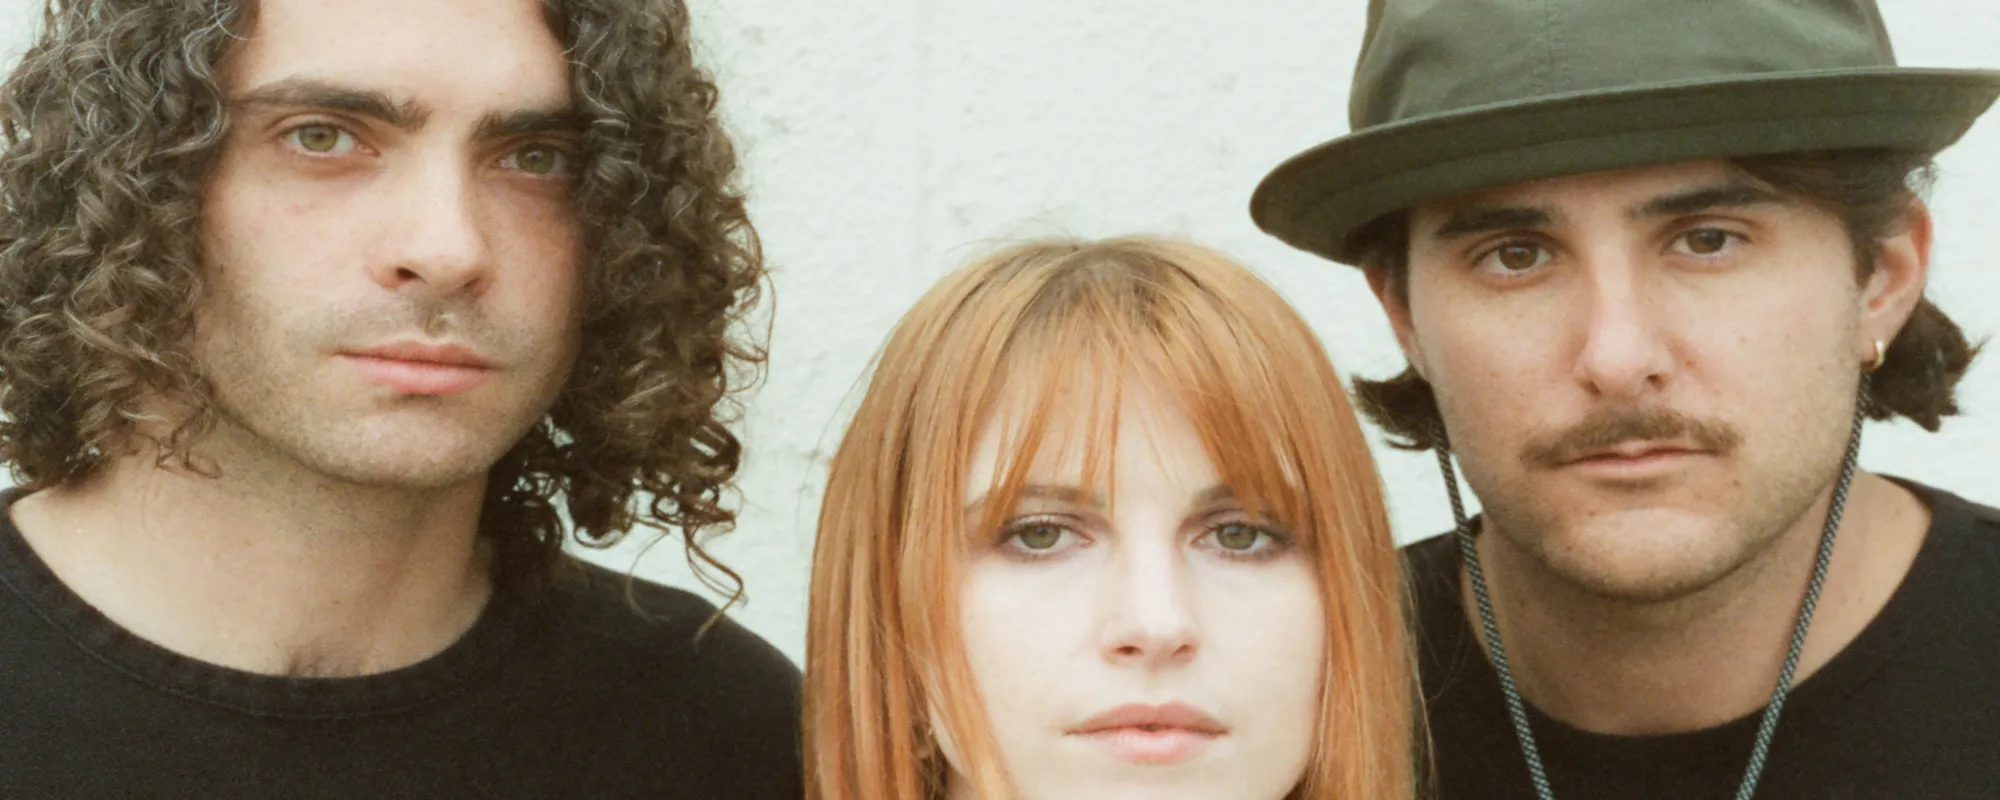 Paramore Share Second Look into Upcoming Album with “The News”